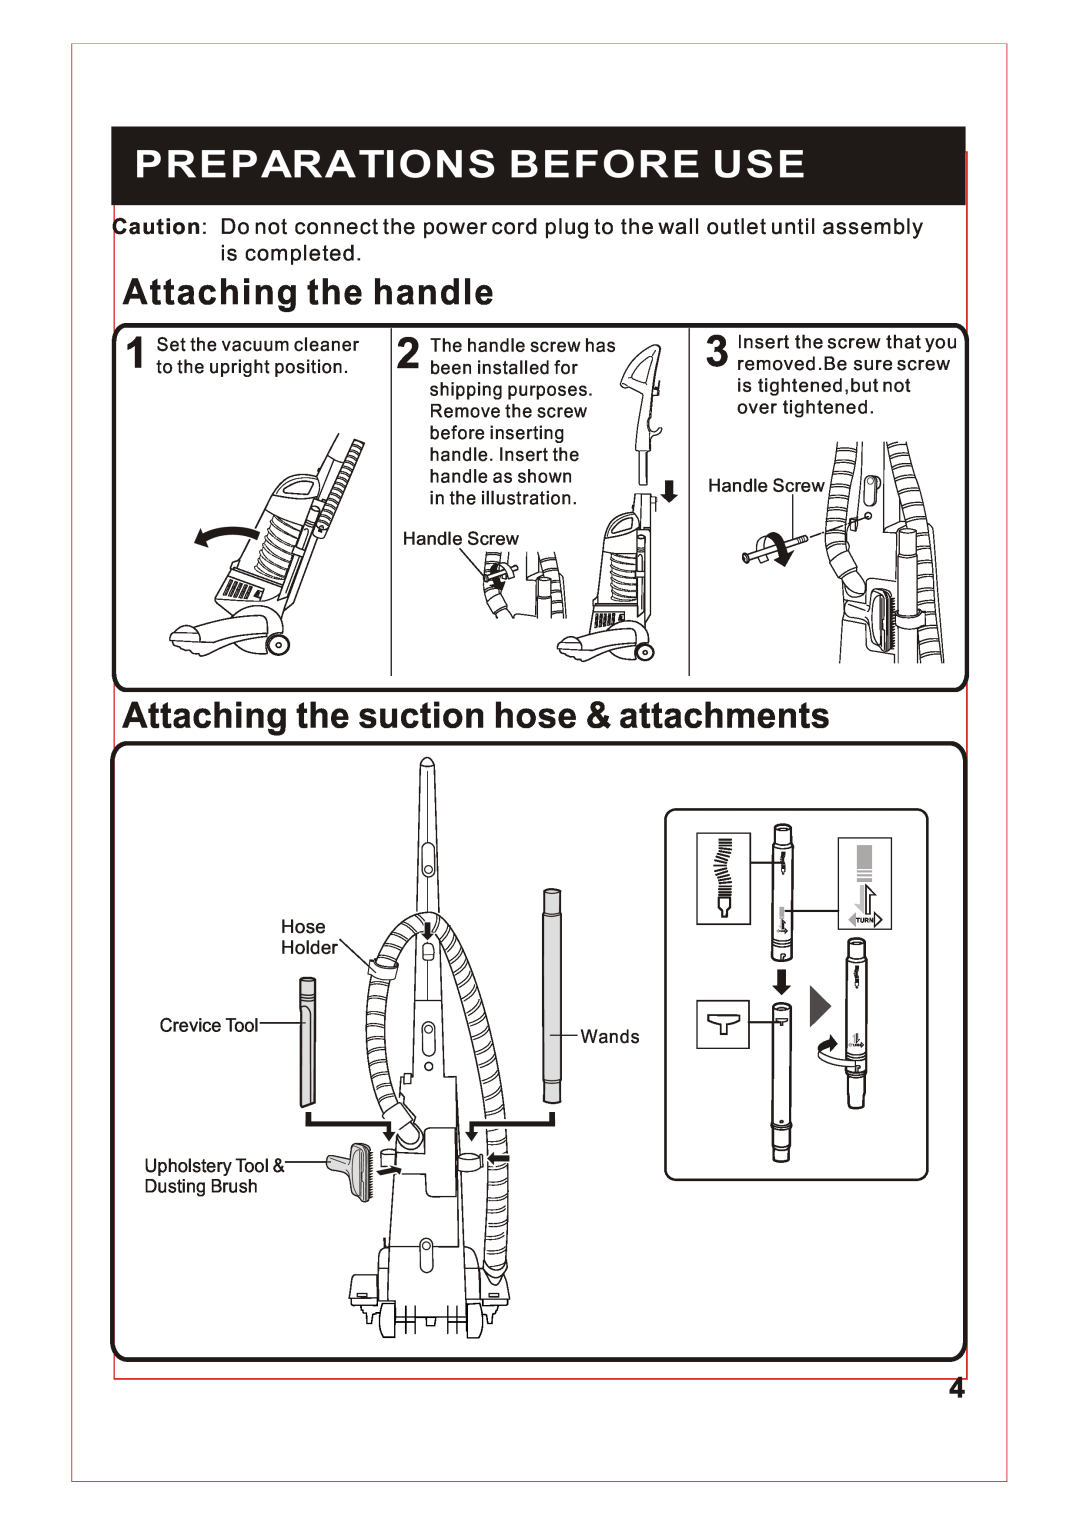 Sanyo SC-X90 Preparations Before Use, Attaching the handle, Attaching the suction hose & attachments, is completed 